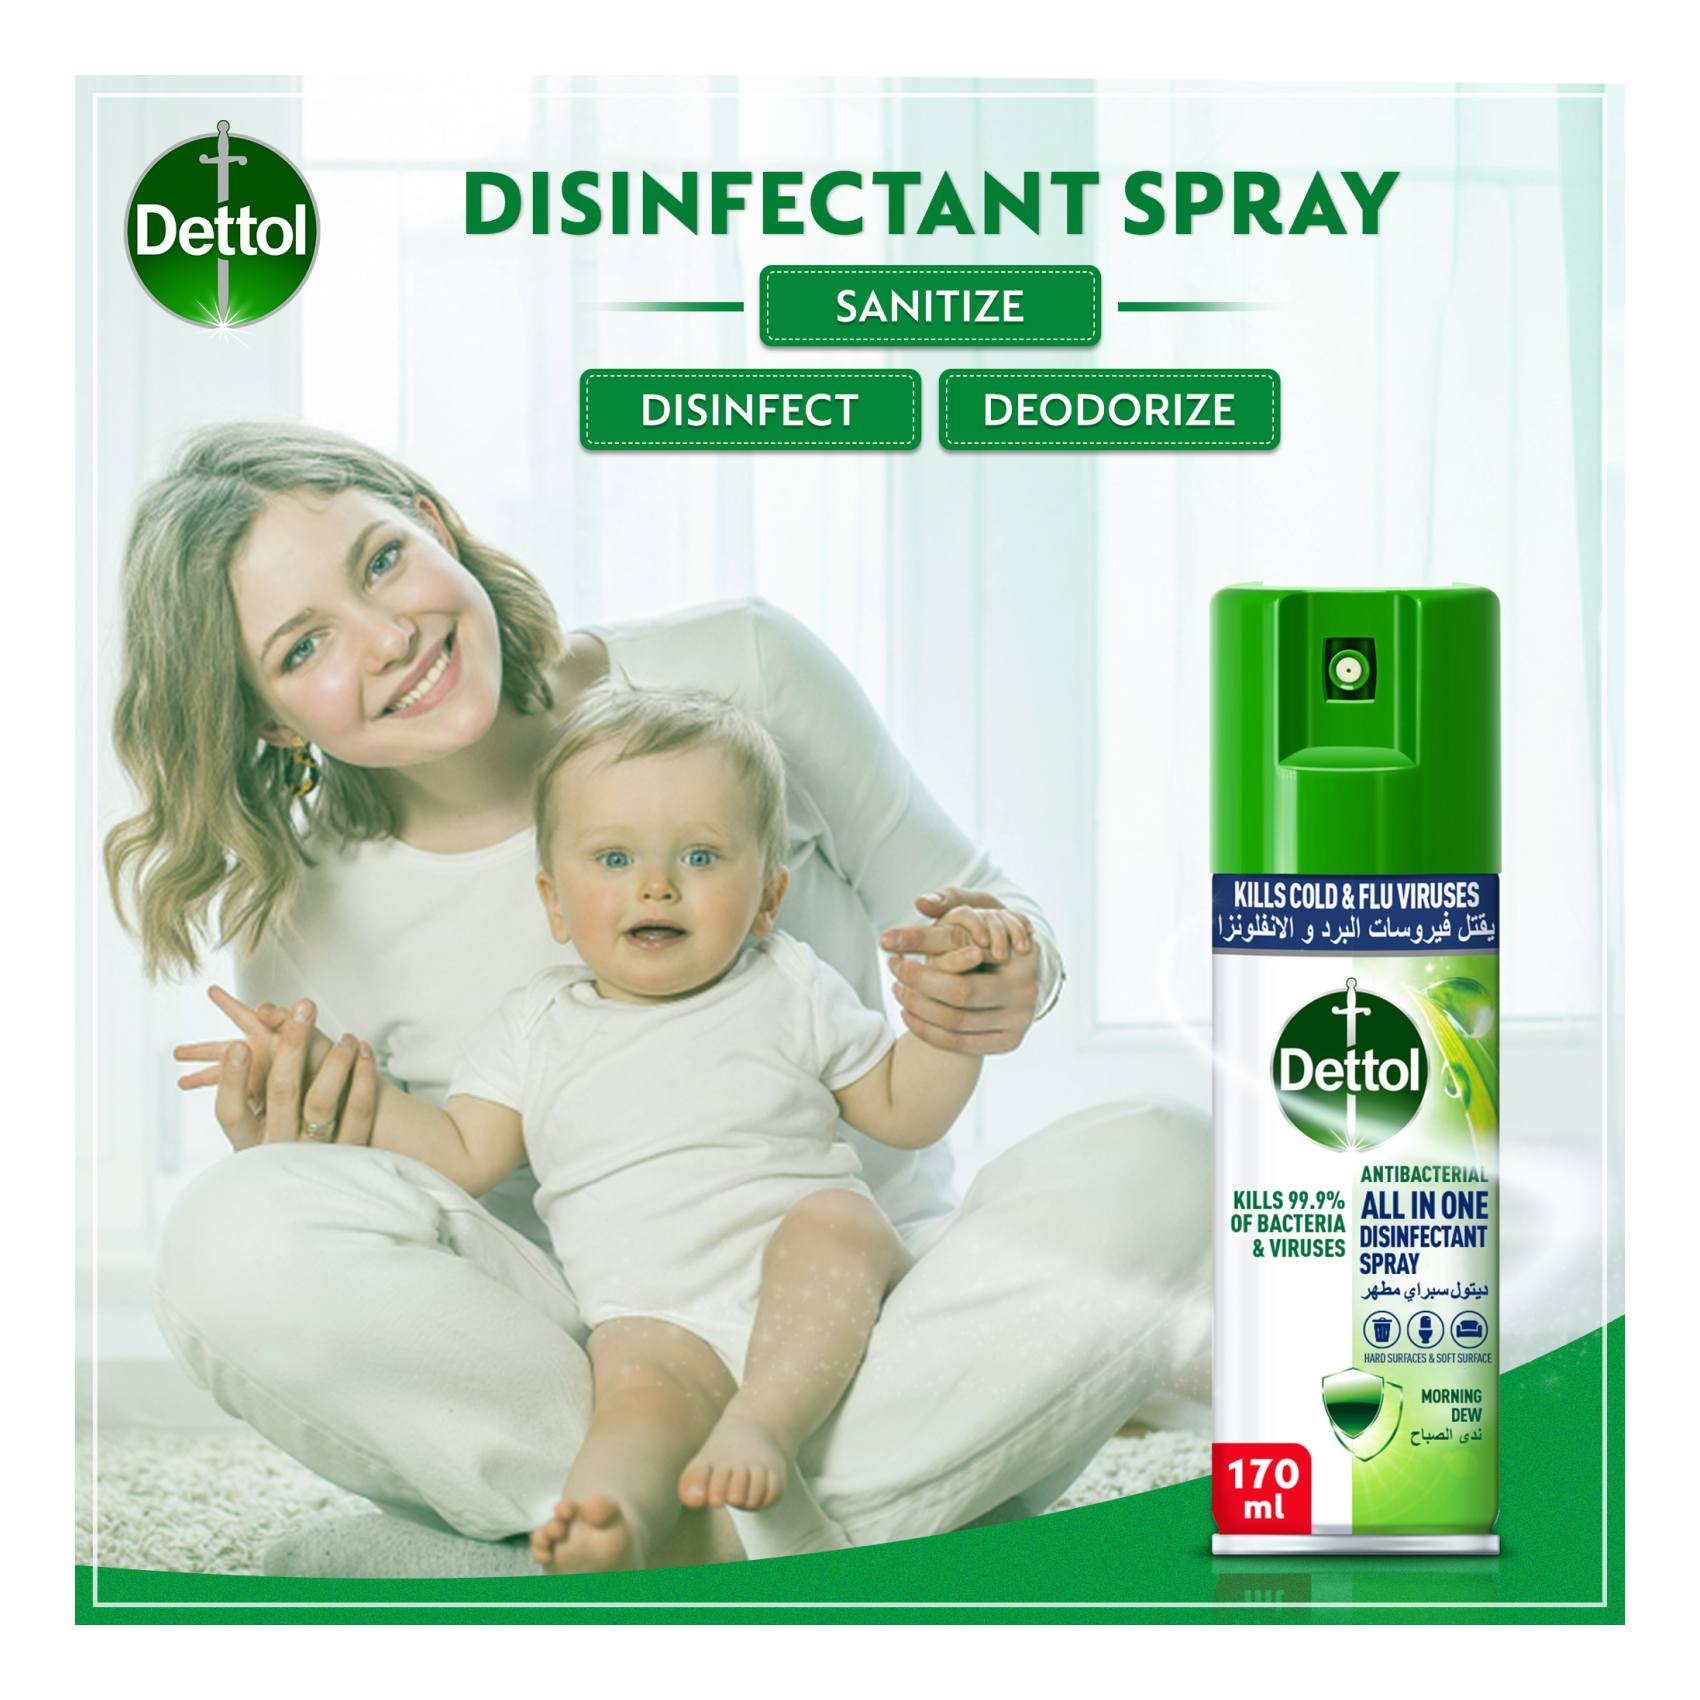 Dettol All-In-One Antibacterial Disinfectant Spray Morning Dew Clear 170ml